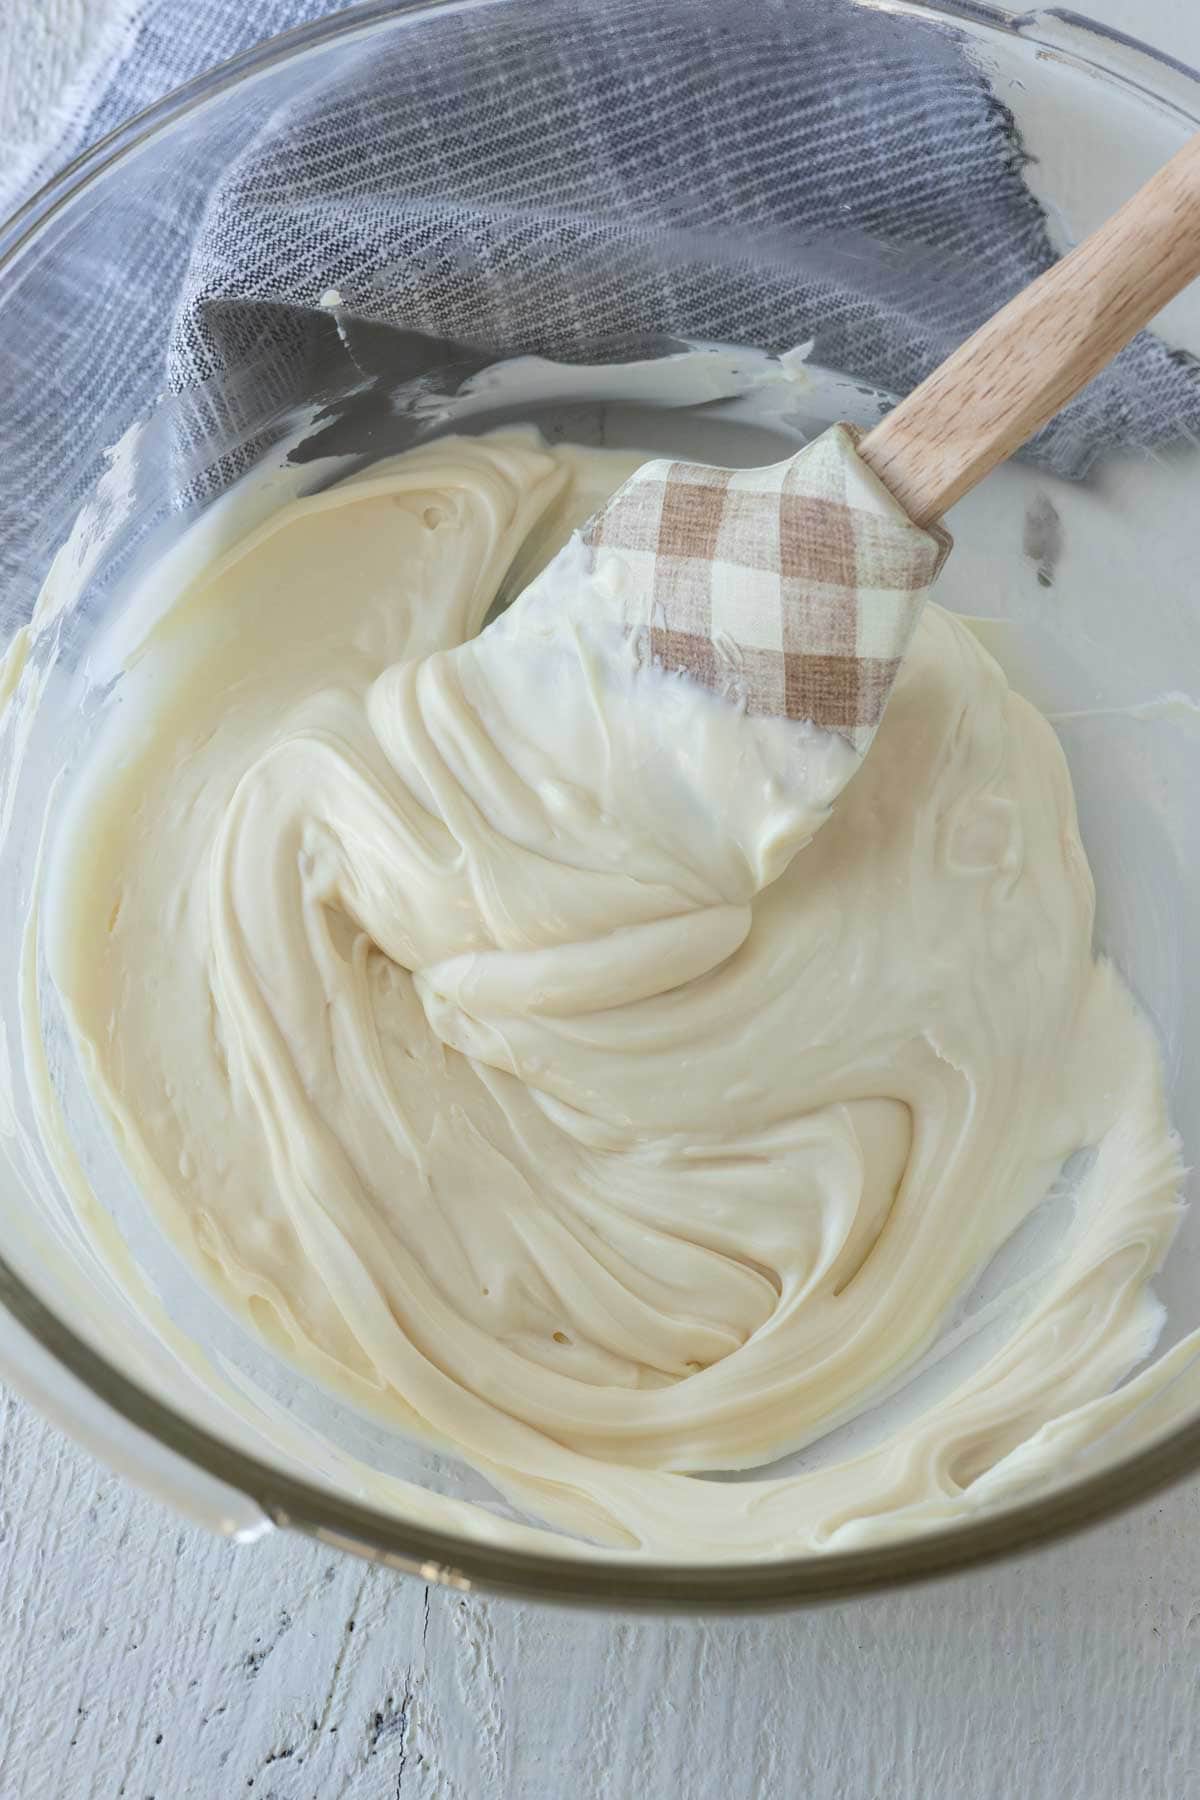 Melted white chocolate in a glass mixing bowl.